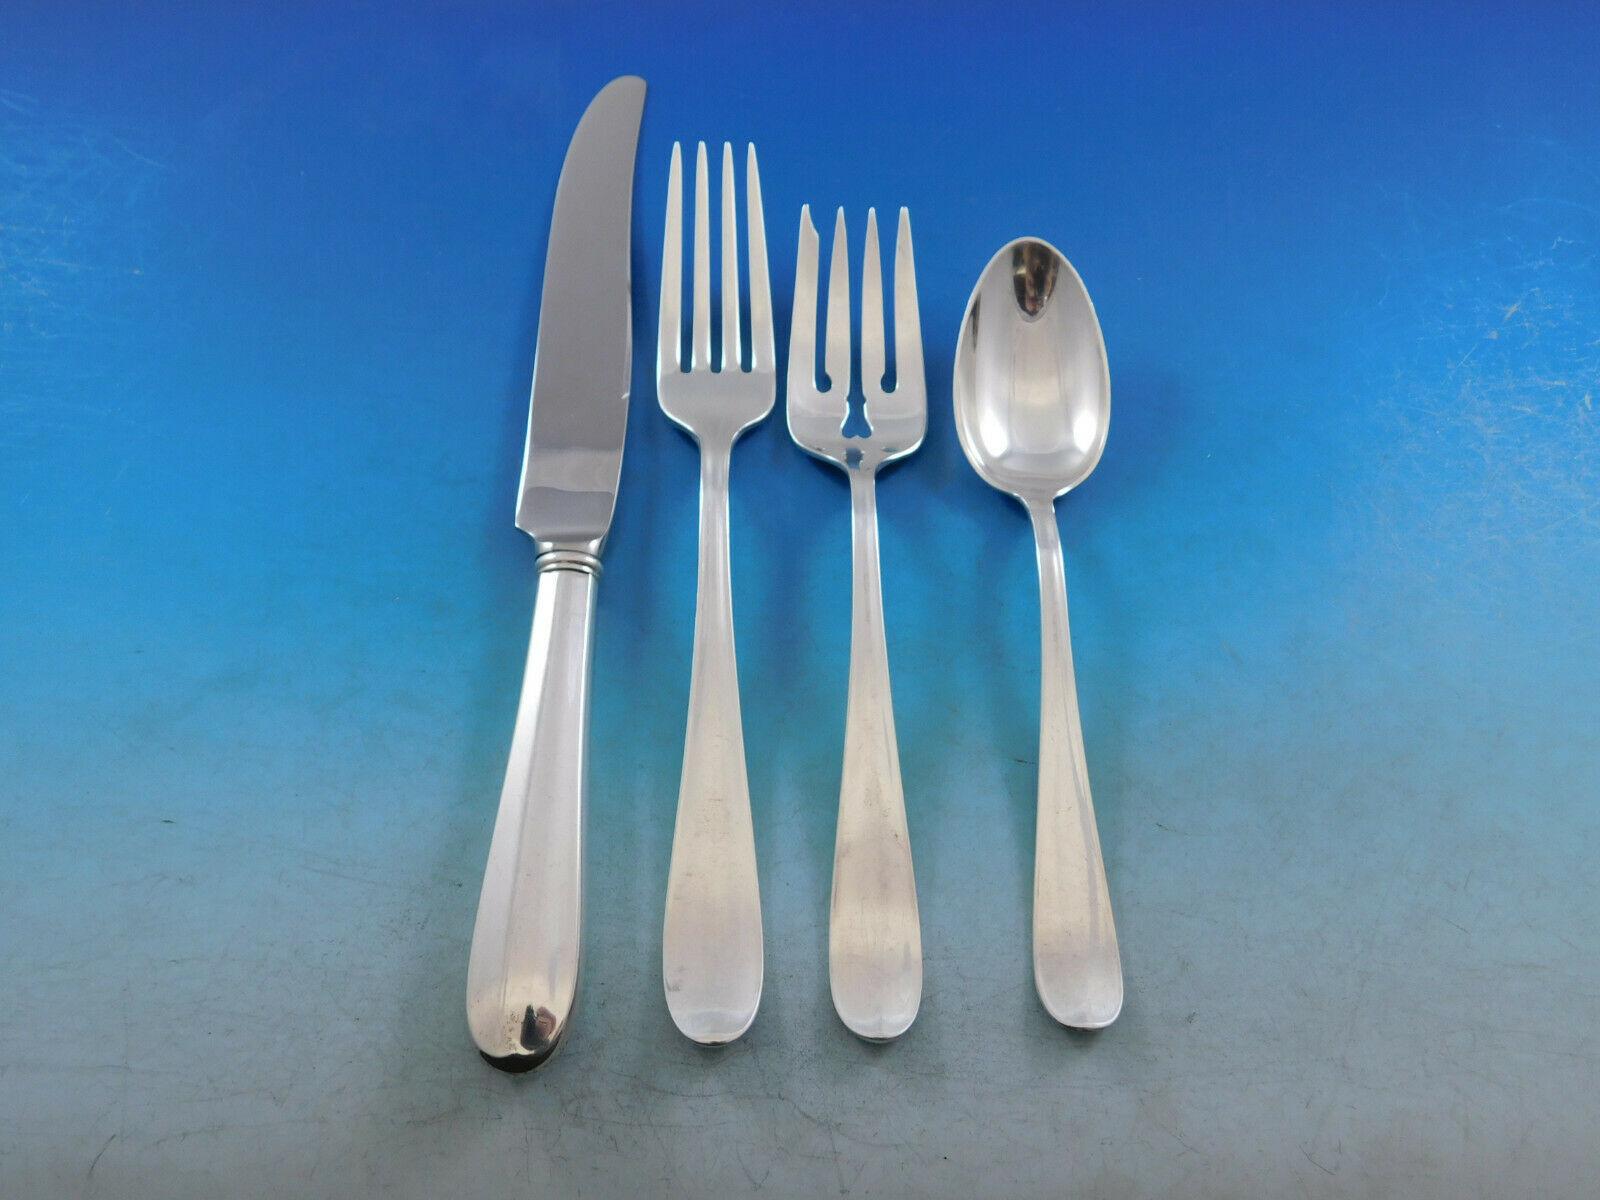 Superb Dolly Madison by Gorham circa 1929 sterling silver flatware set - 74 pieces. This scarce pattern is unadorned and timeless. This set includes:
8 regular knives, 8 3/4